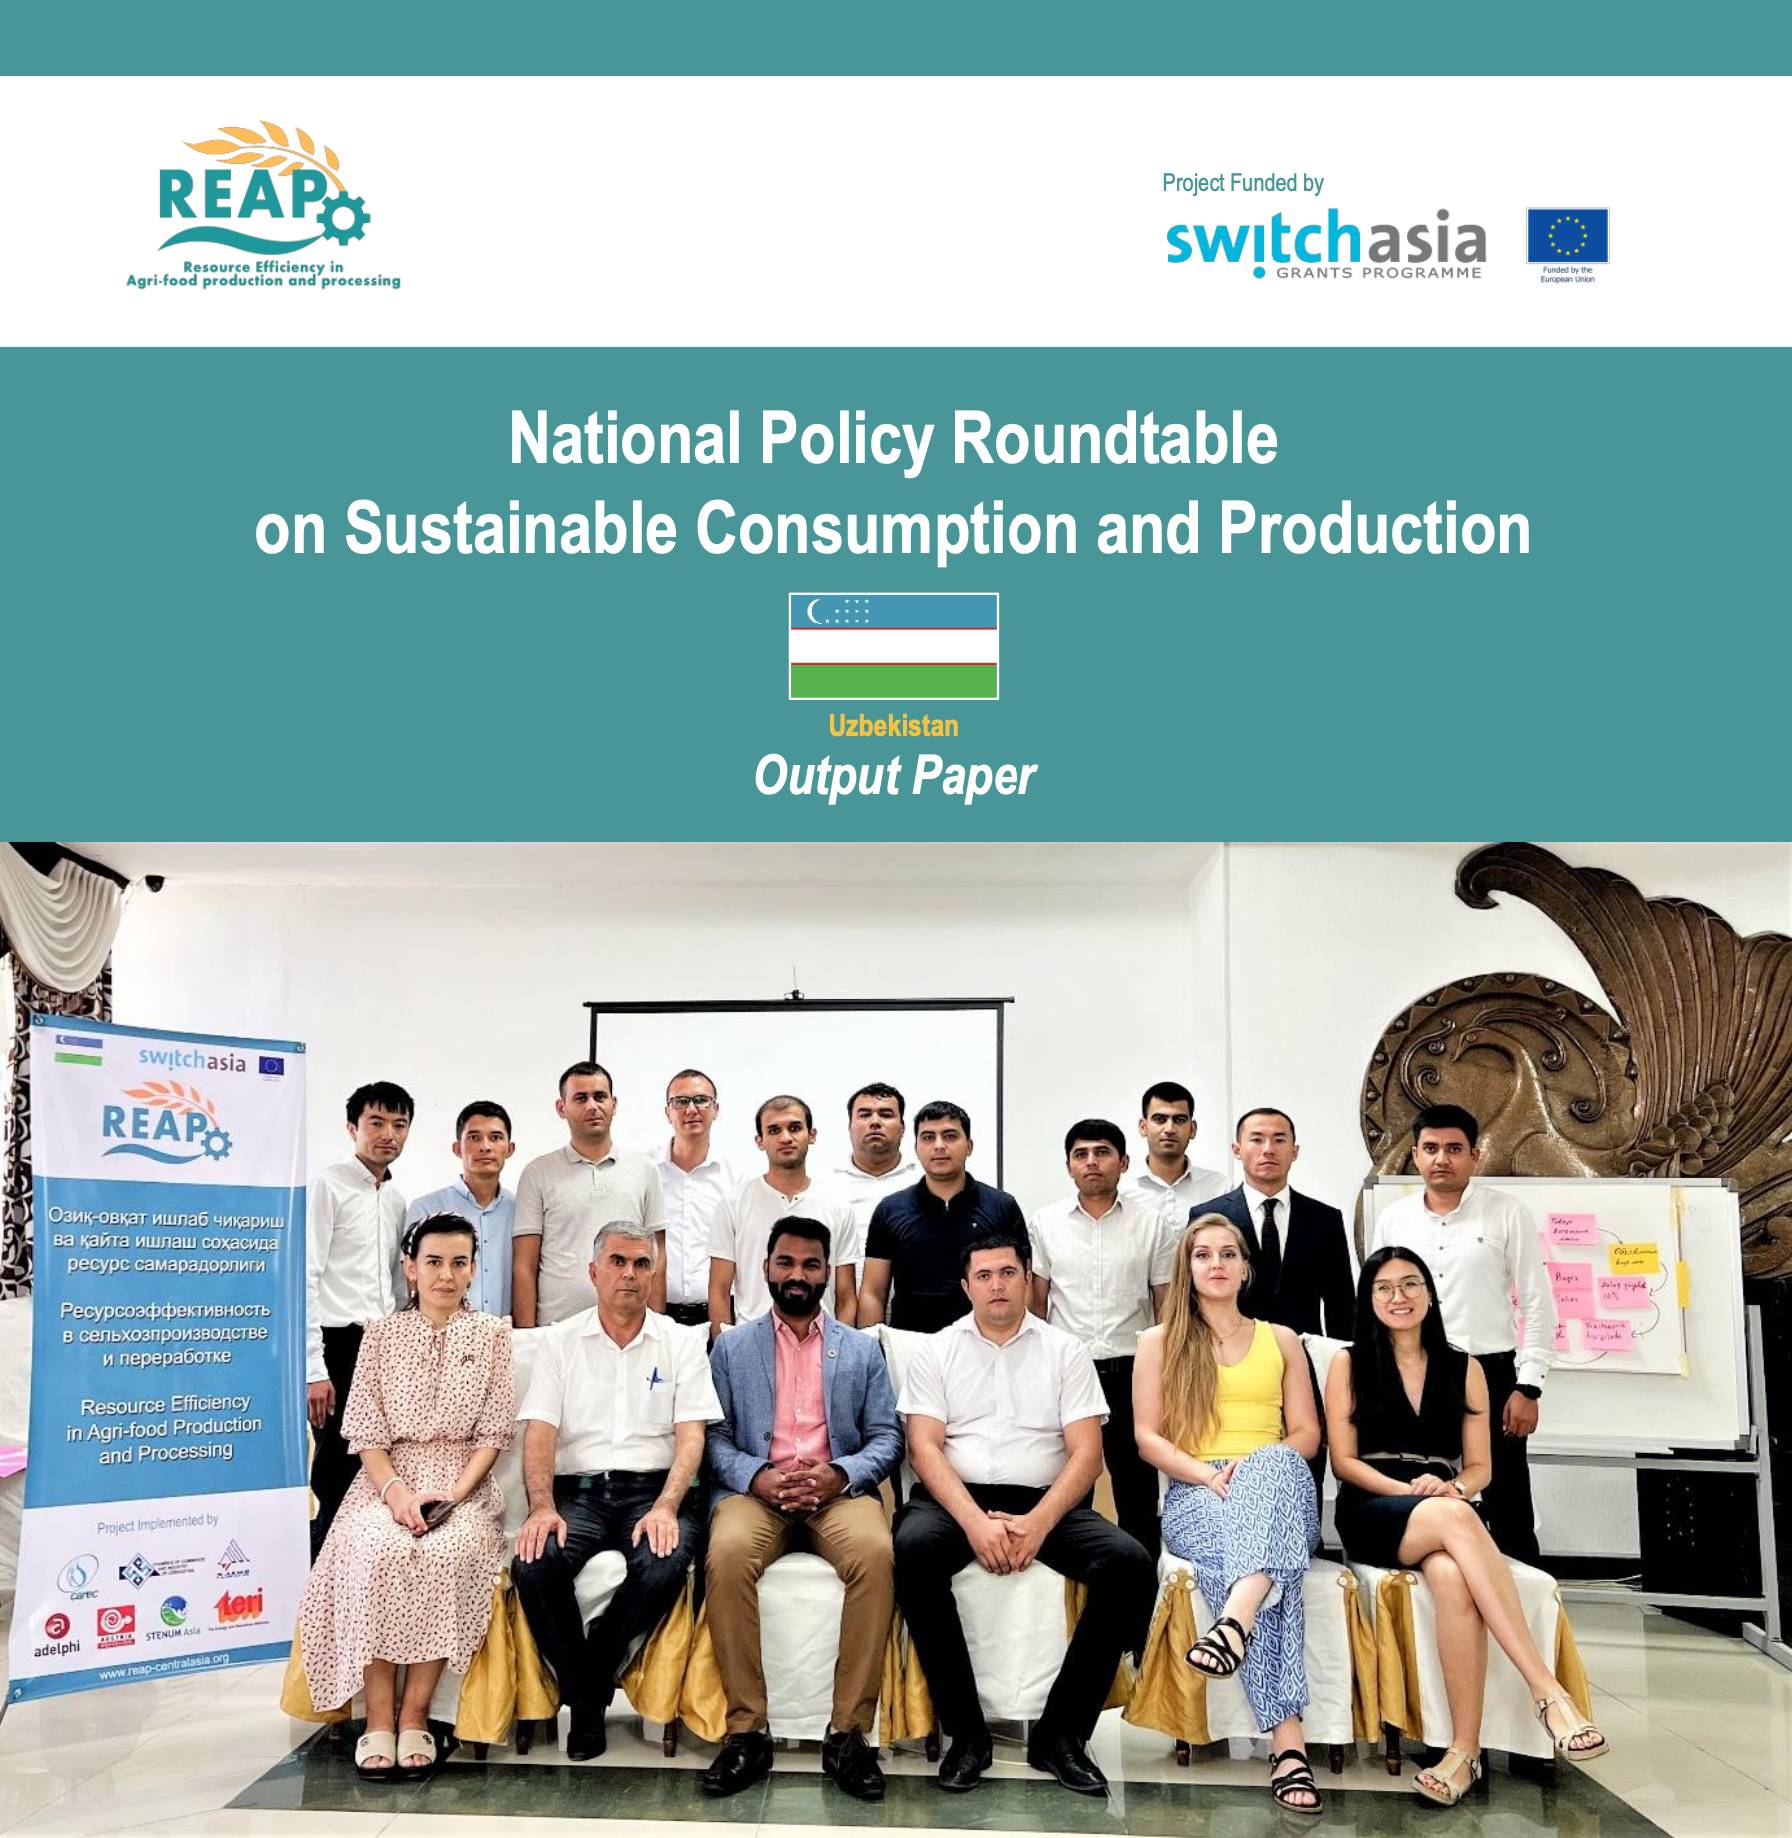 National Policy Roundtable on Sustainable Consumption and Production in Uzbekistan